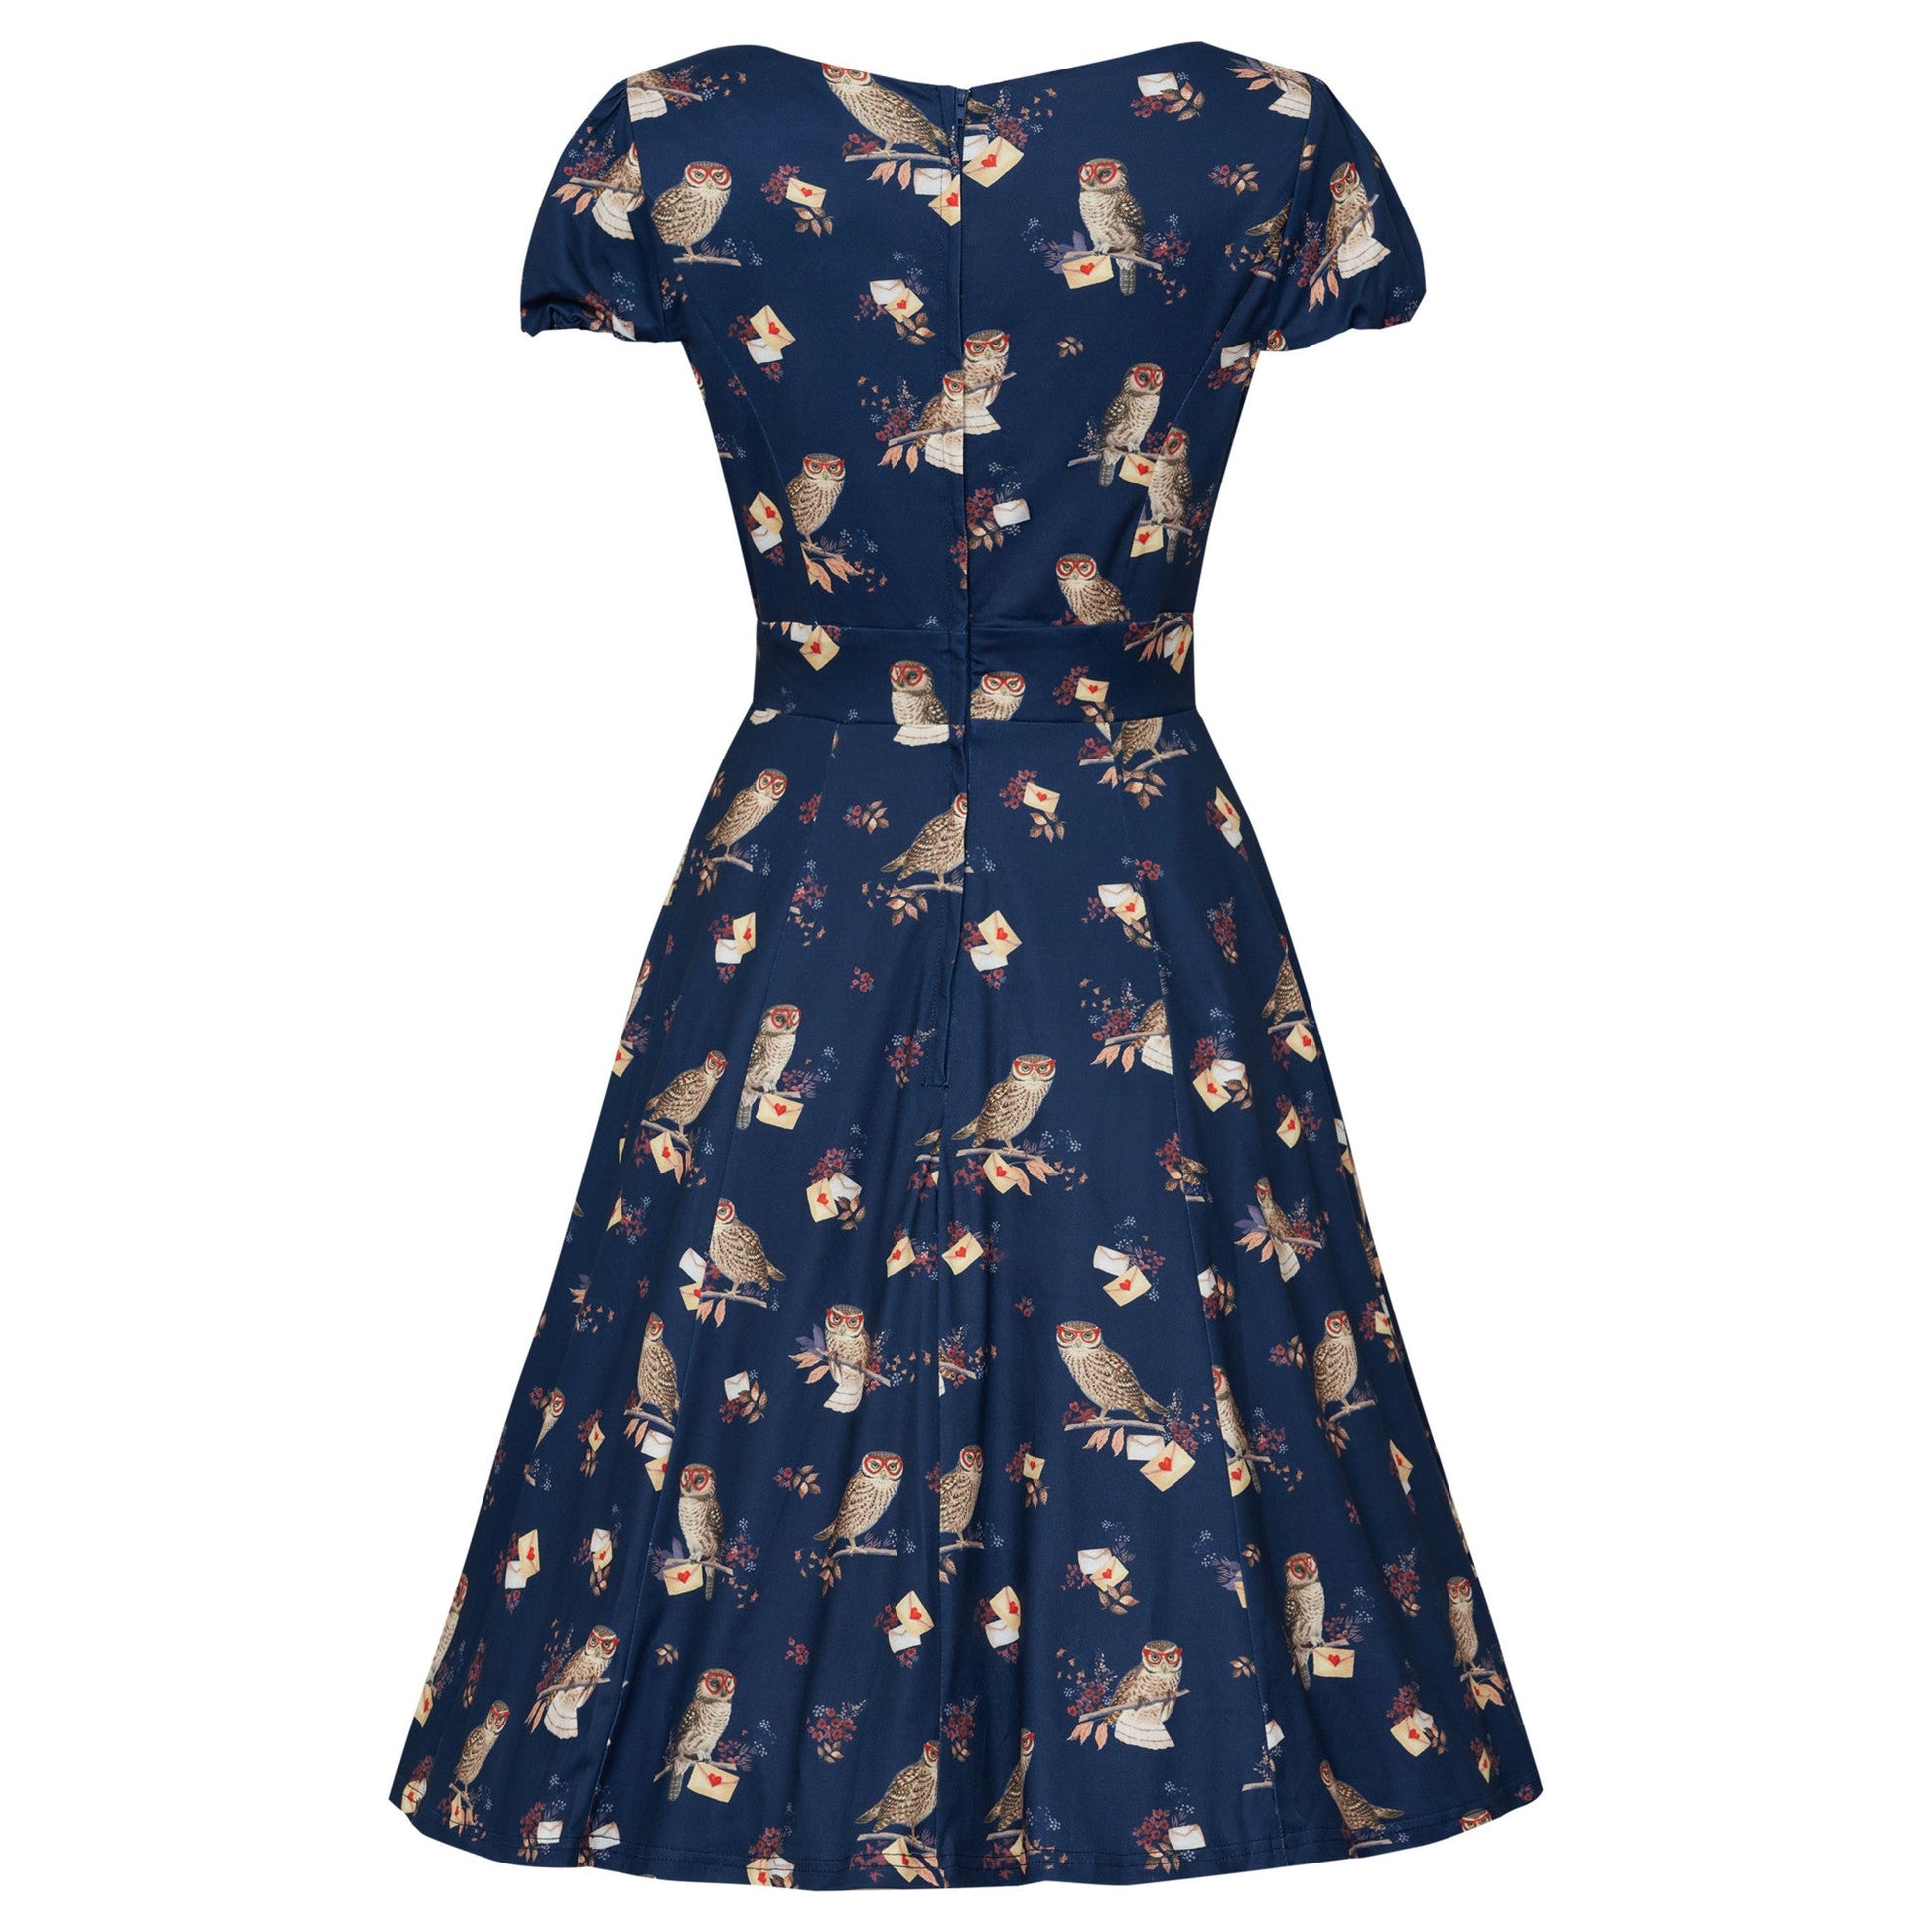 Claudia Flirty Fifties Dress - Owl and Letter Print - Rockamilly-Dresses-Vintage